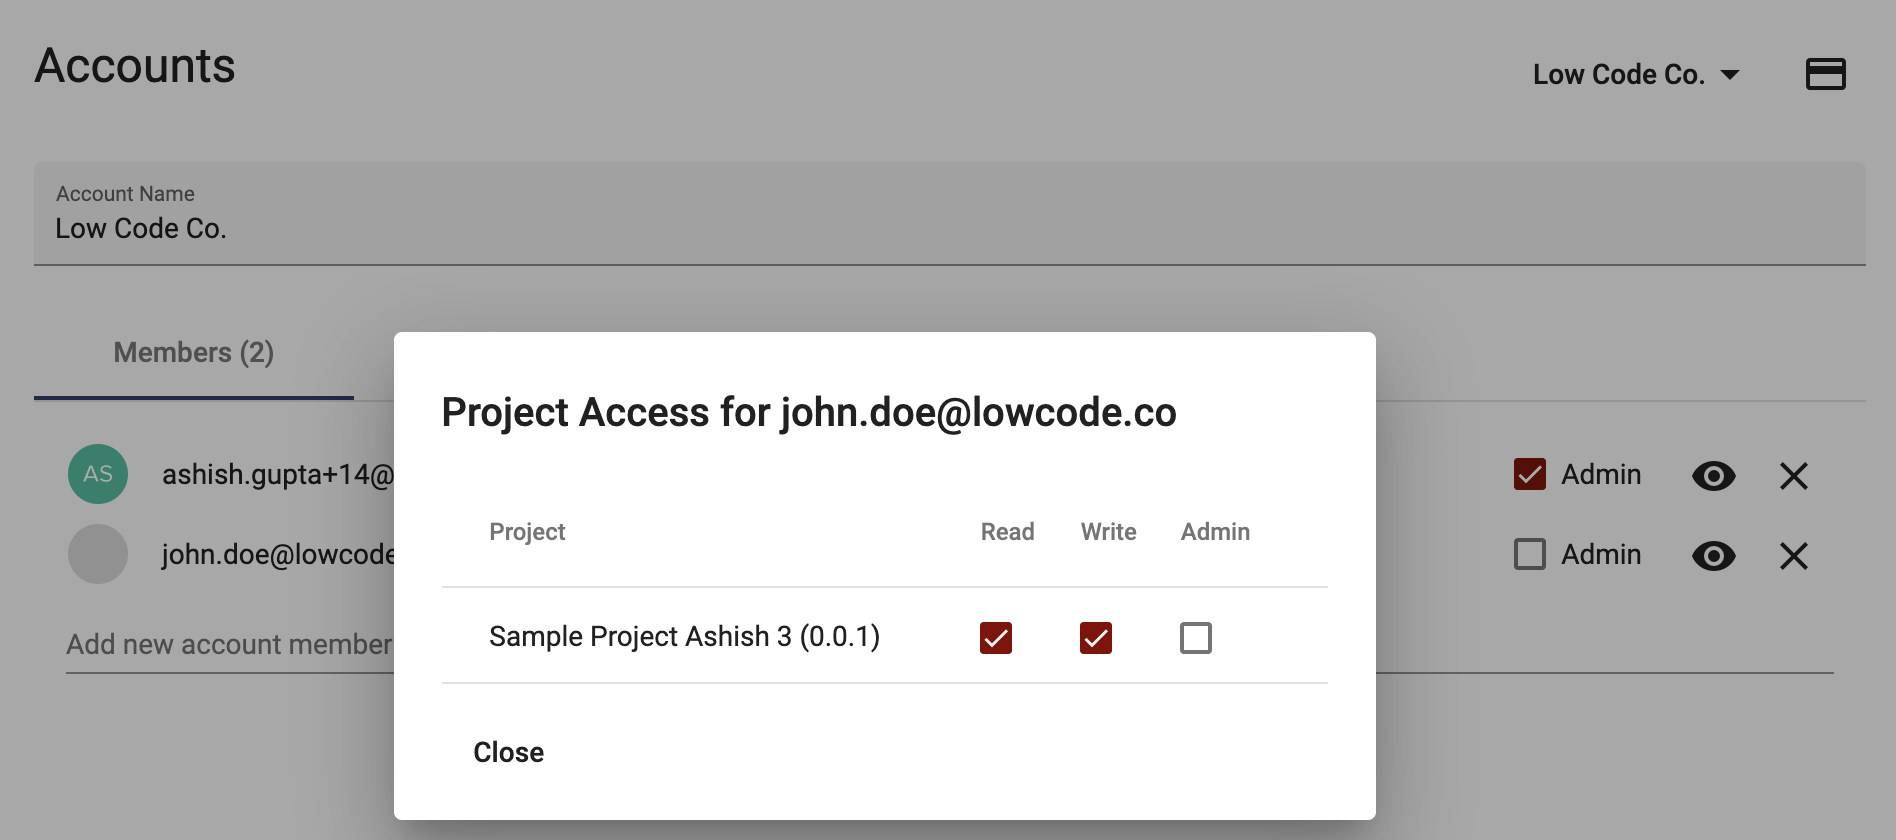 Project Access dialog